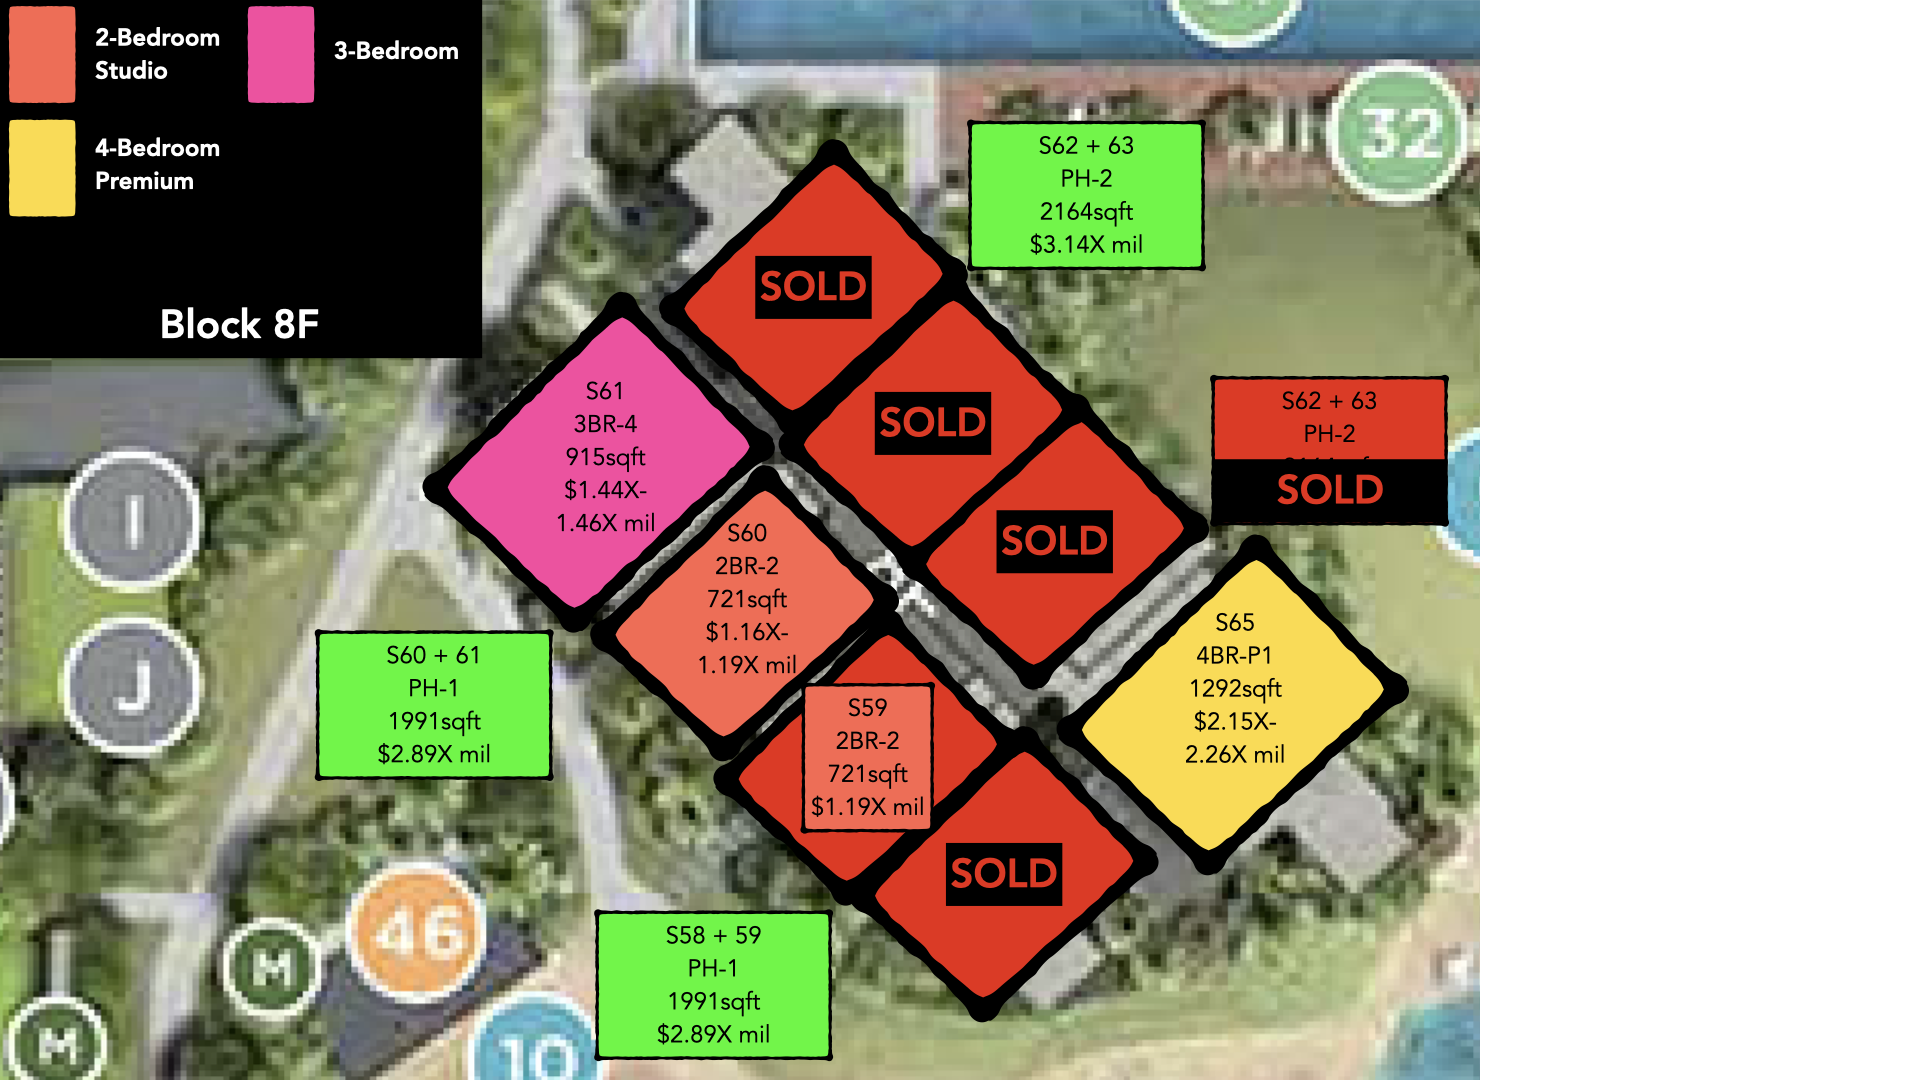 Parc Clematis Price Distribution Site Plan Block 8F PropertyLimBrothers.png